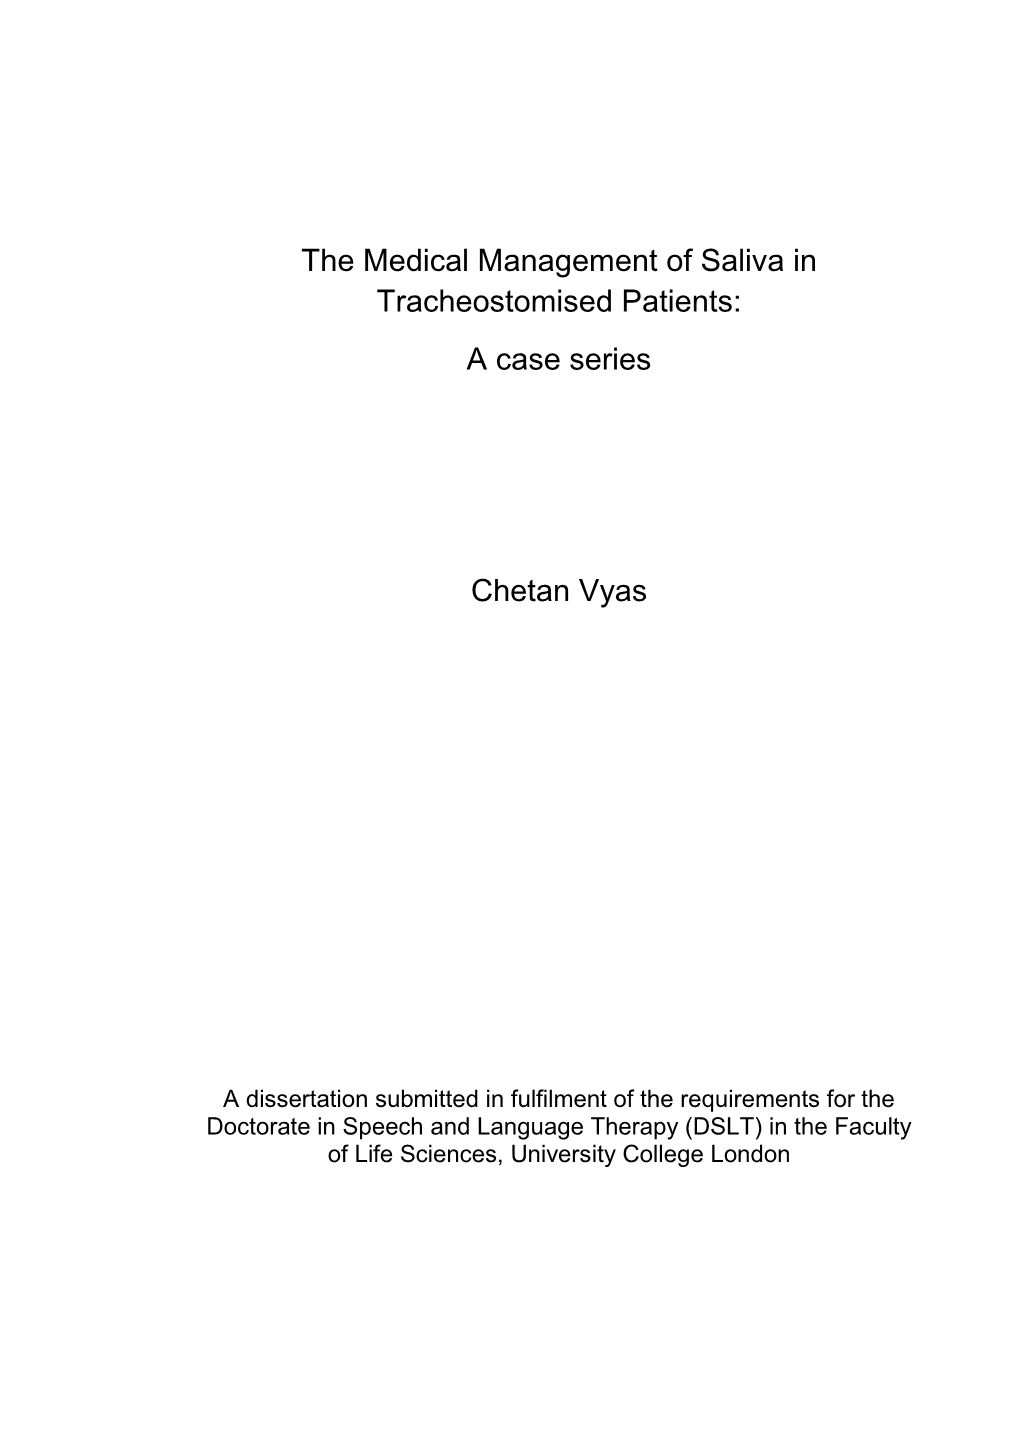 The Medical Management of Saliva in Tracheostomised Patients: a Case Series